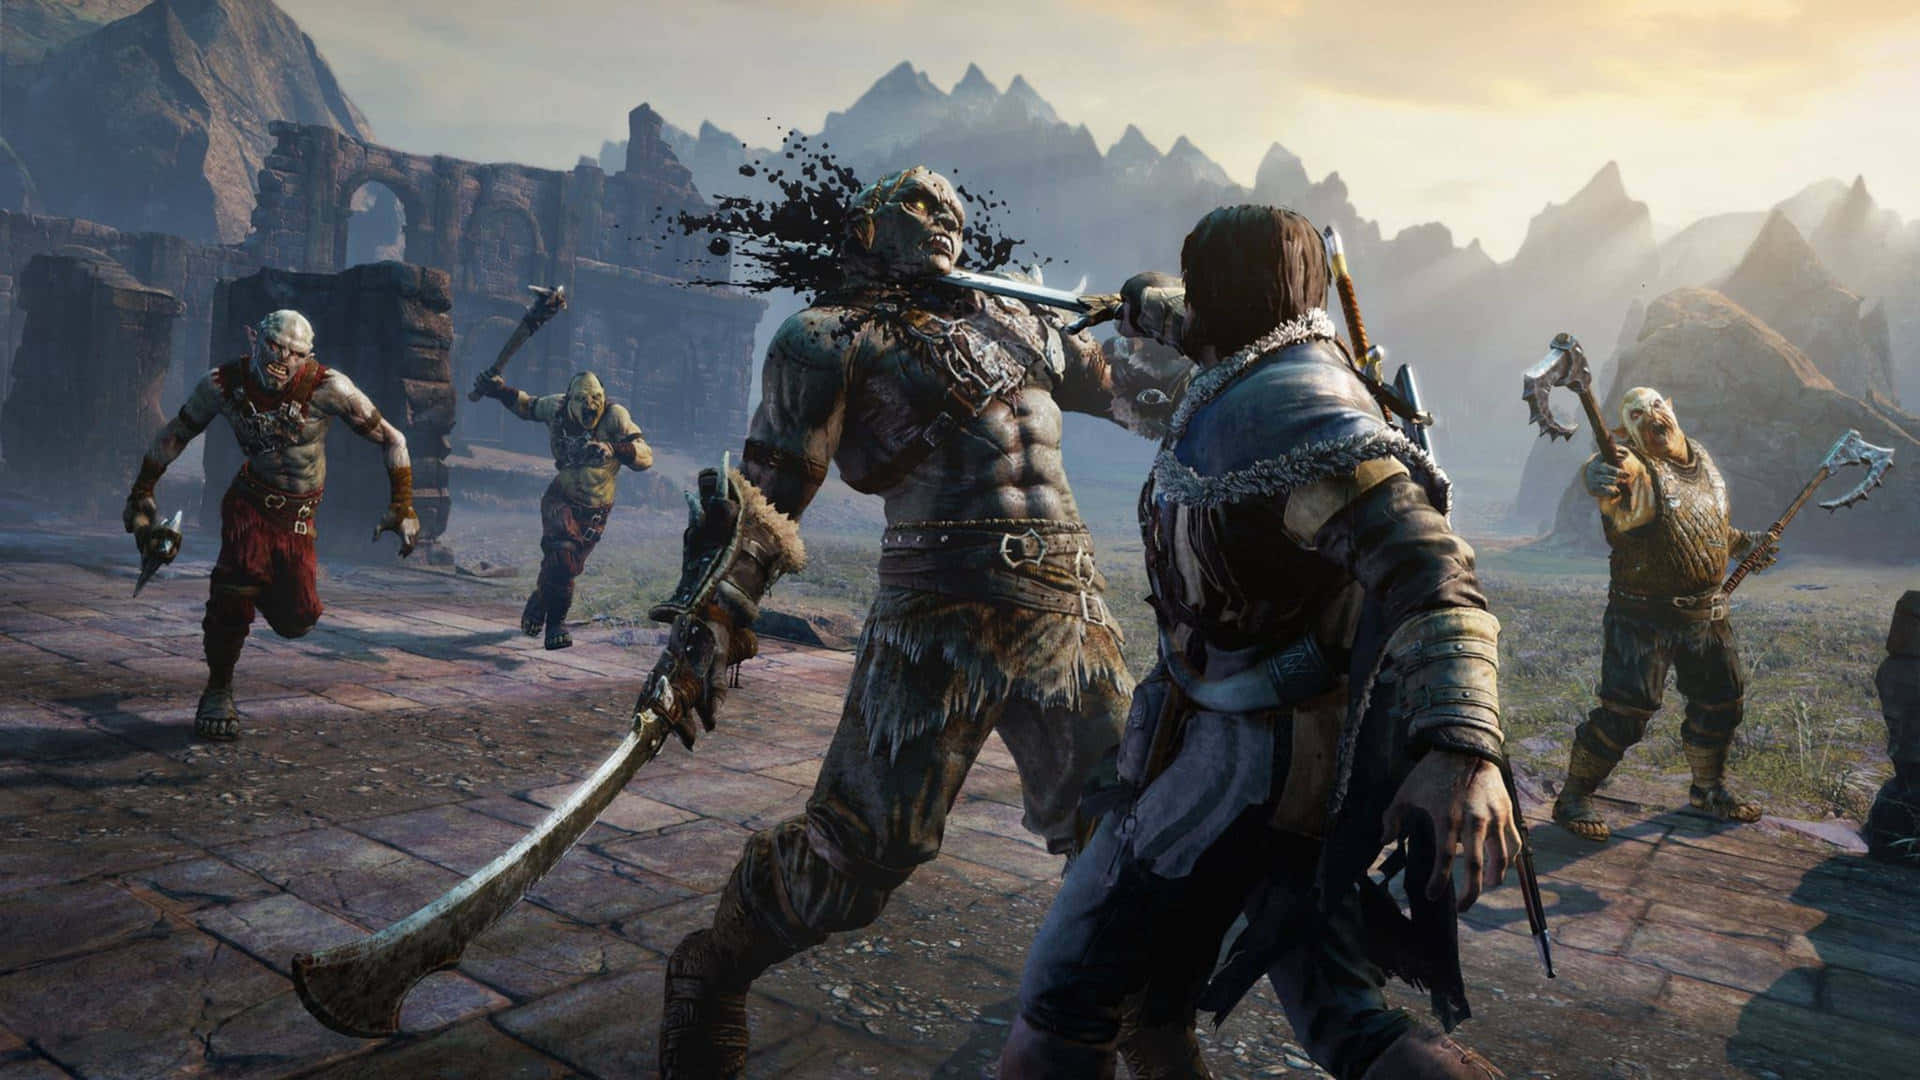 Enter the world of Mordor with Shadow of Mordor